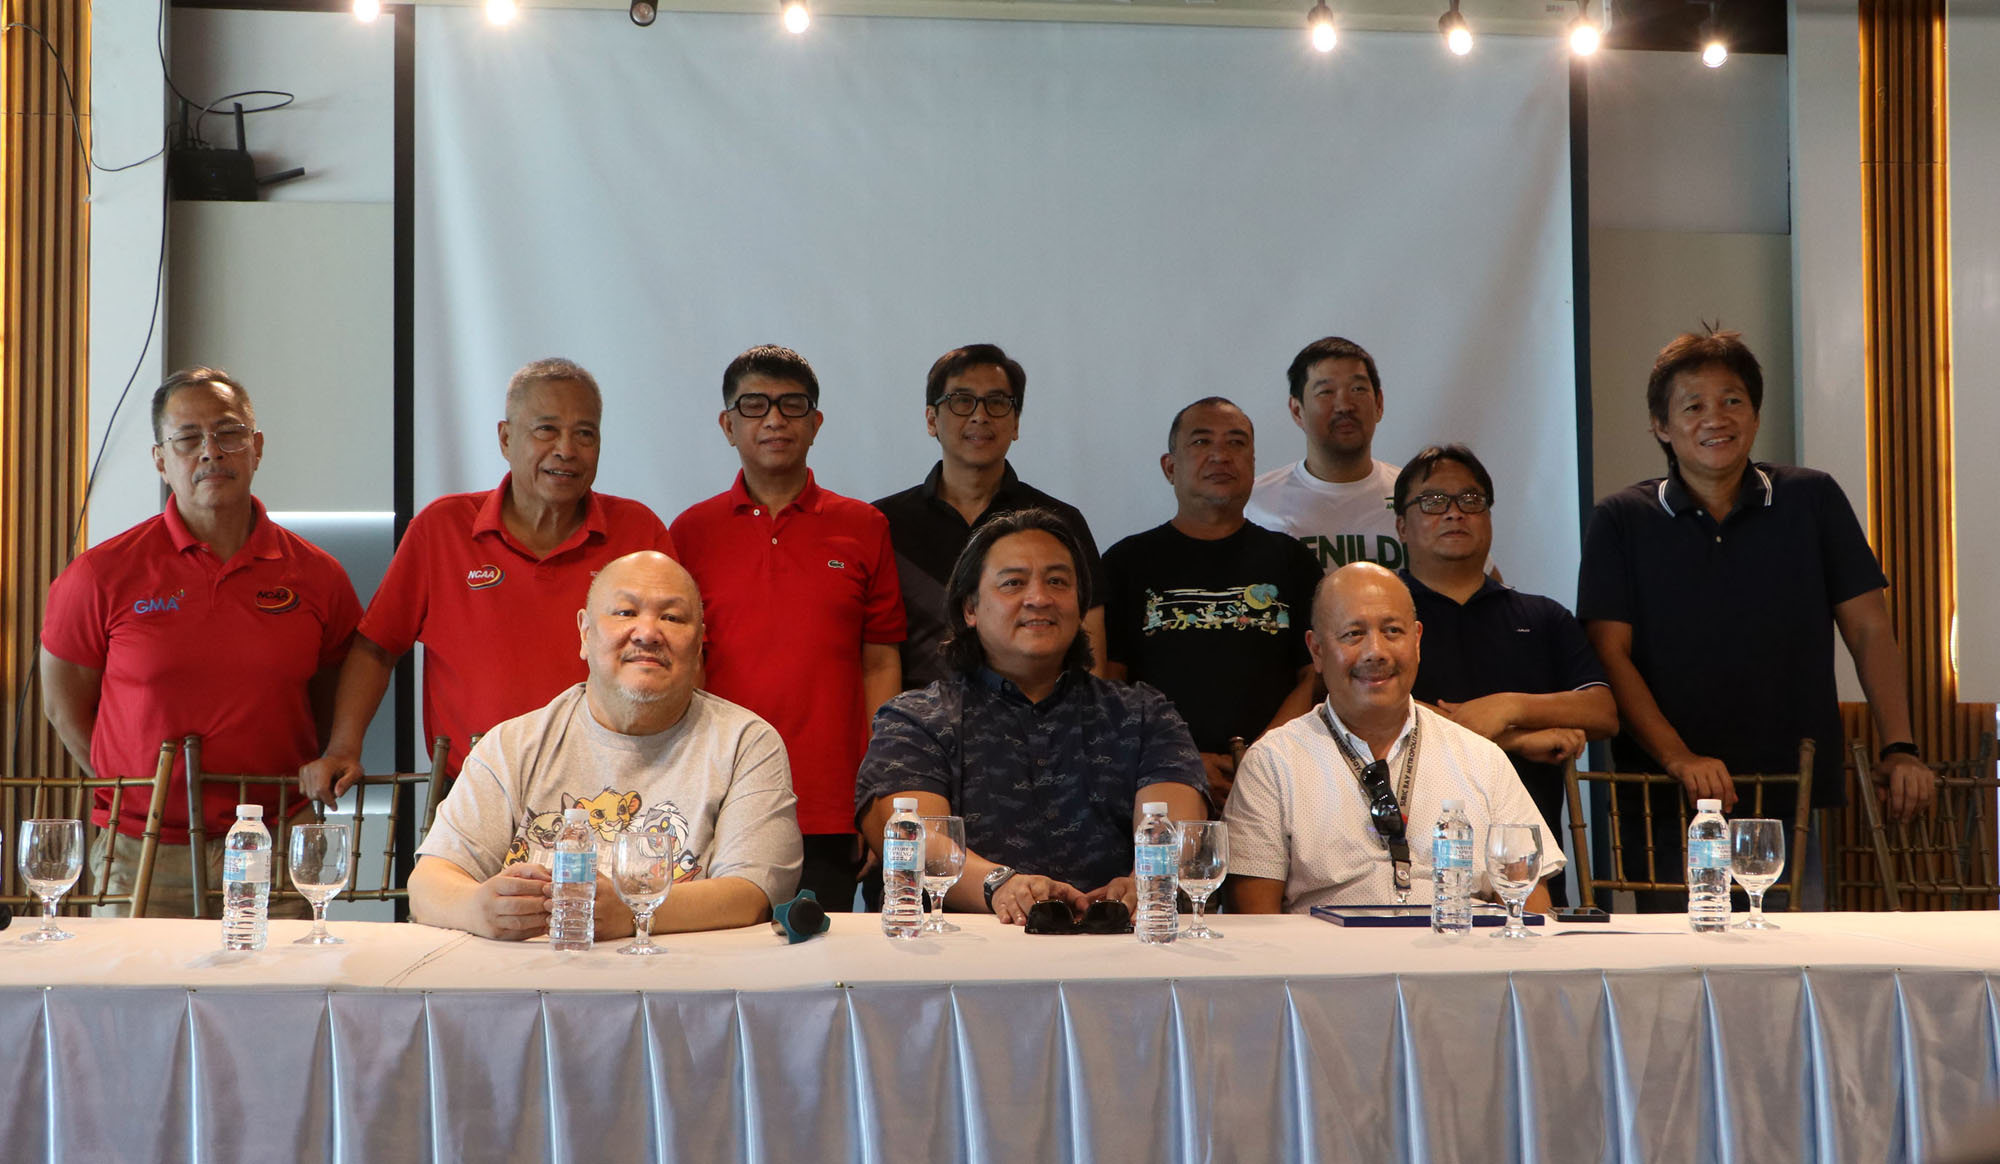 Subic Bay Metropolitan Authority (SBMA) Deputy Administrator for Administration Atty. Ruel John Kabigting (2nd from right) joins Peter Cayco, Chairman of the National Collegiate Athletic Association (NCAA) Season 99 Beach Volleyball Tournament; Efren Jose Y. Supan, Chairman, Management Committee of NCAA and Fr. Victor Calvo Jr. of Colegio de San Juan de Letran and also the in-coming Chairman for the NCAA Centennial celebration, during a press briefing held Wednesday, January 24 at the Welltz Bar and Resto in Subic Bay Freeport zone. The NCAA management encourages Olongapo, Zambales, Bataan and Subic Freeport residents to watch volleyball games as the 10-member schools of the NCAA battle for the men’s, women’s and junior championships during the five-day event at Subic Sandcourt.